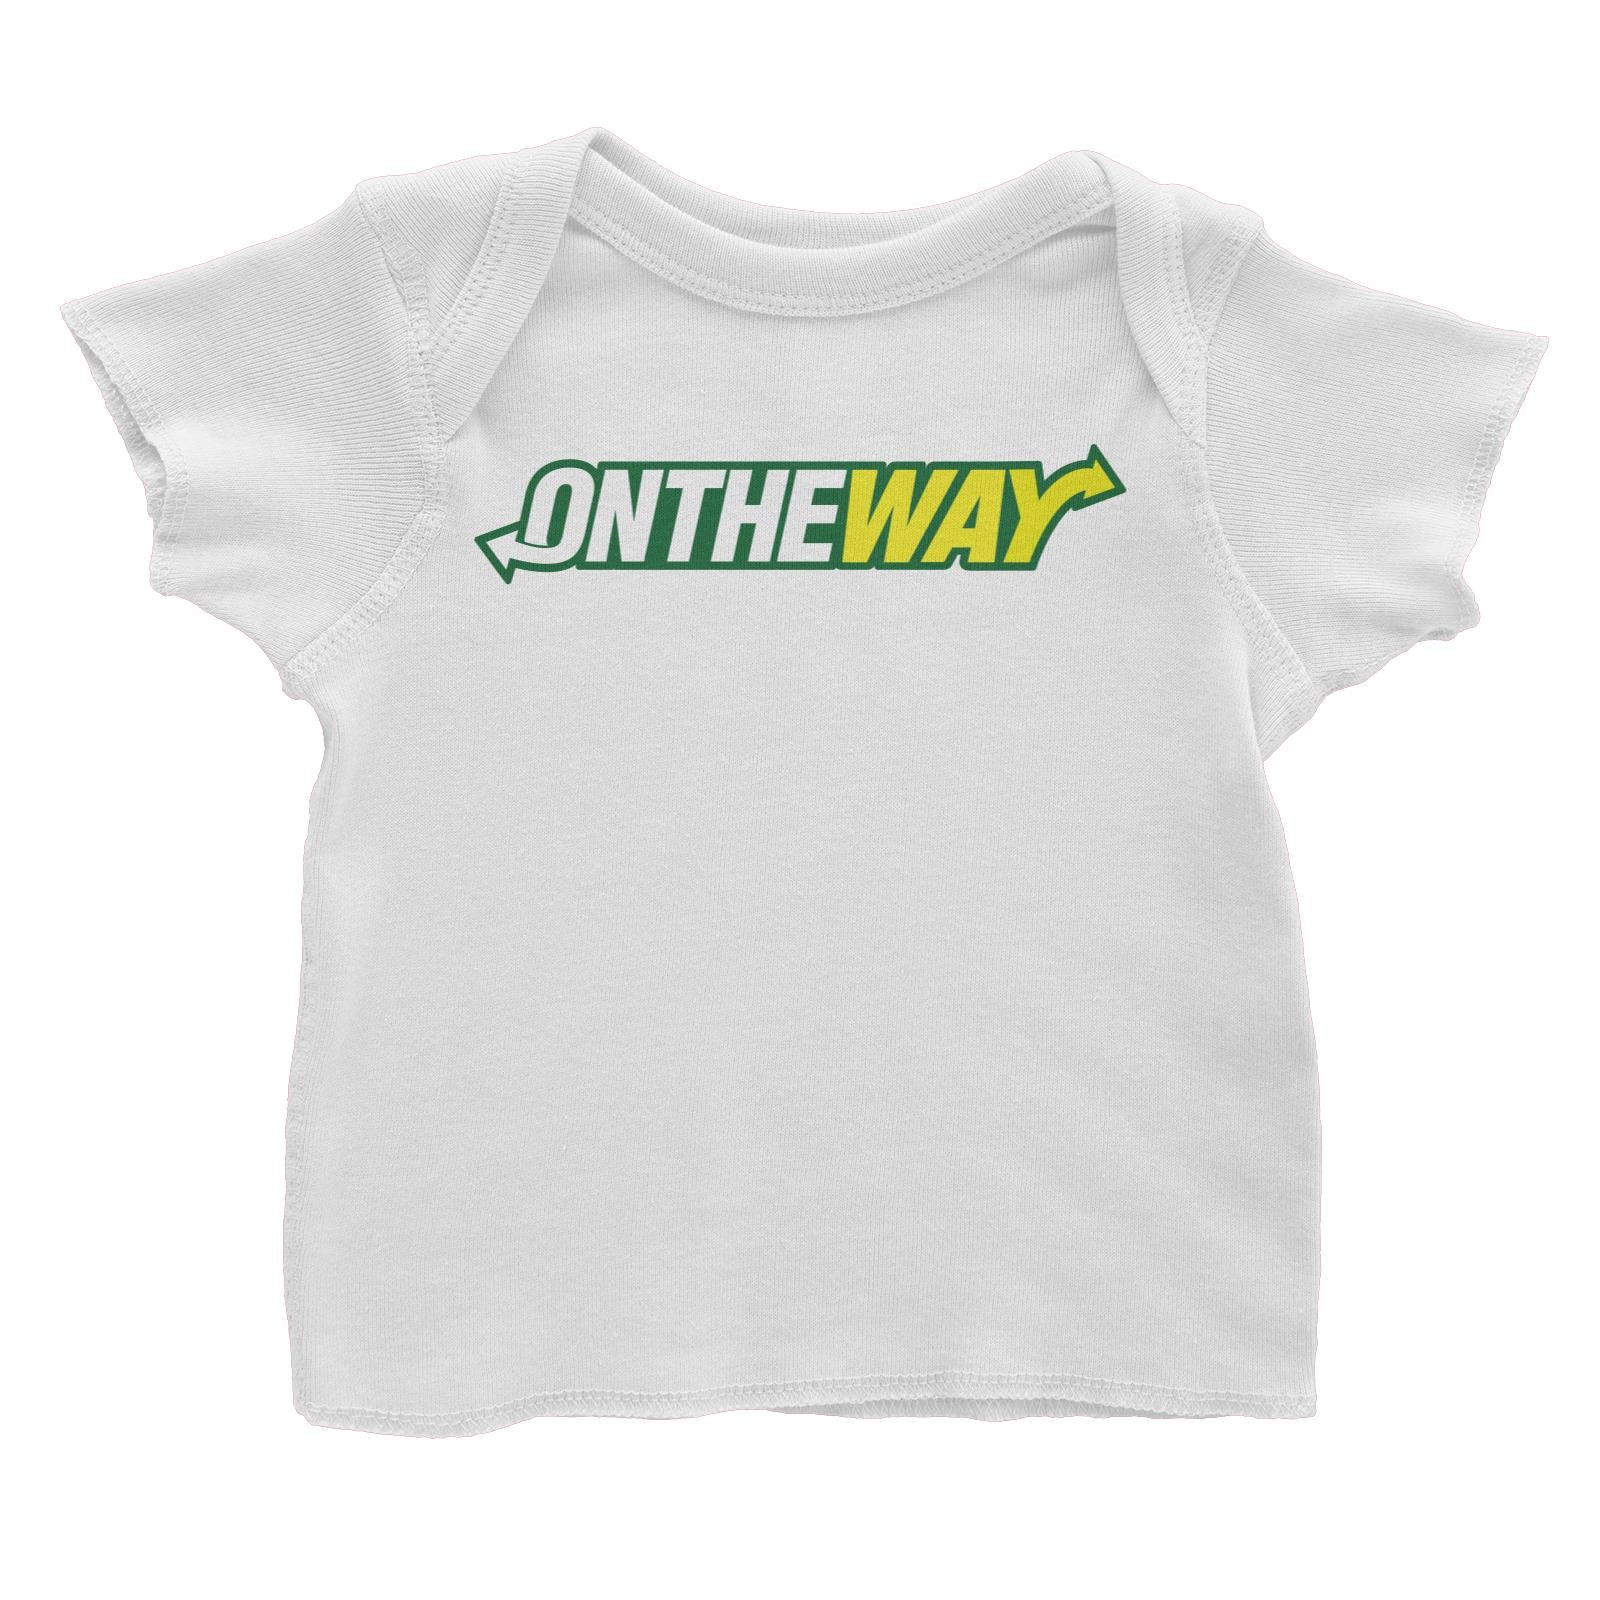 Slang Statement On The Way Baby T-Shirt